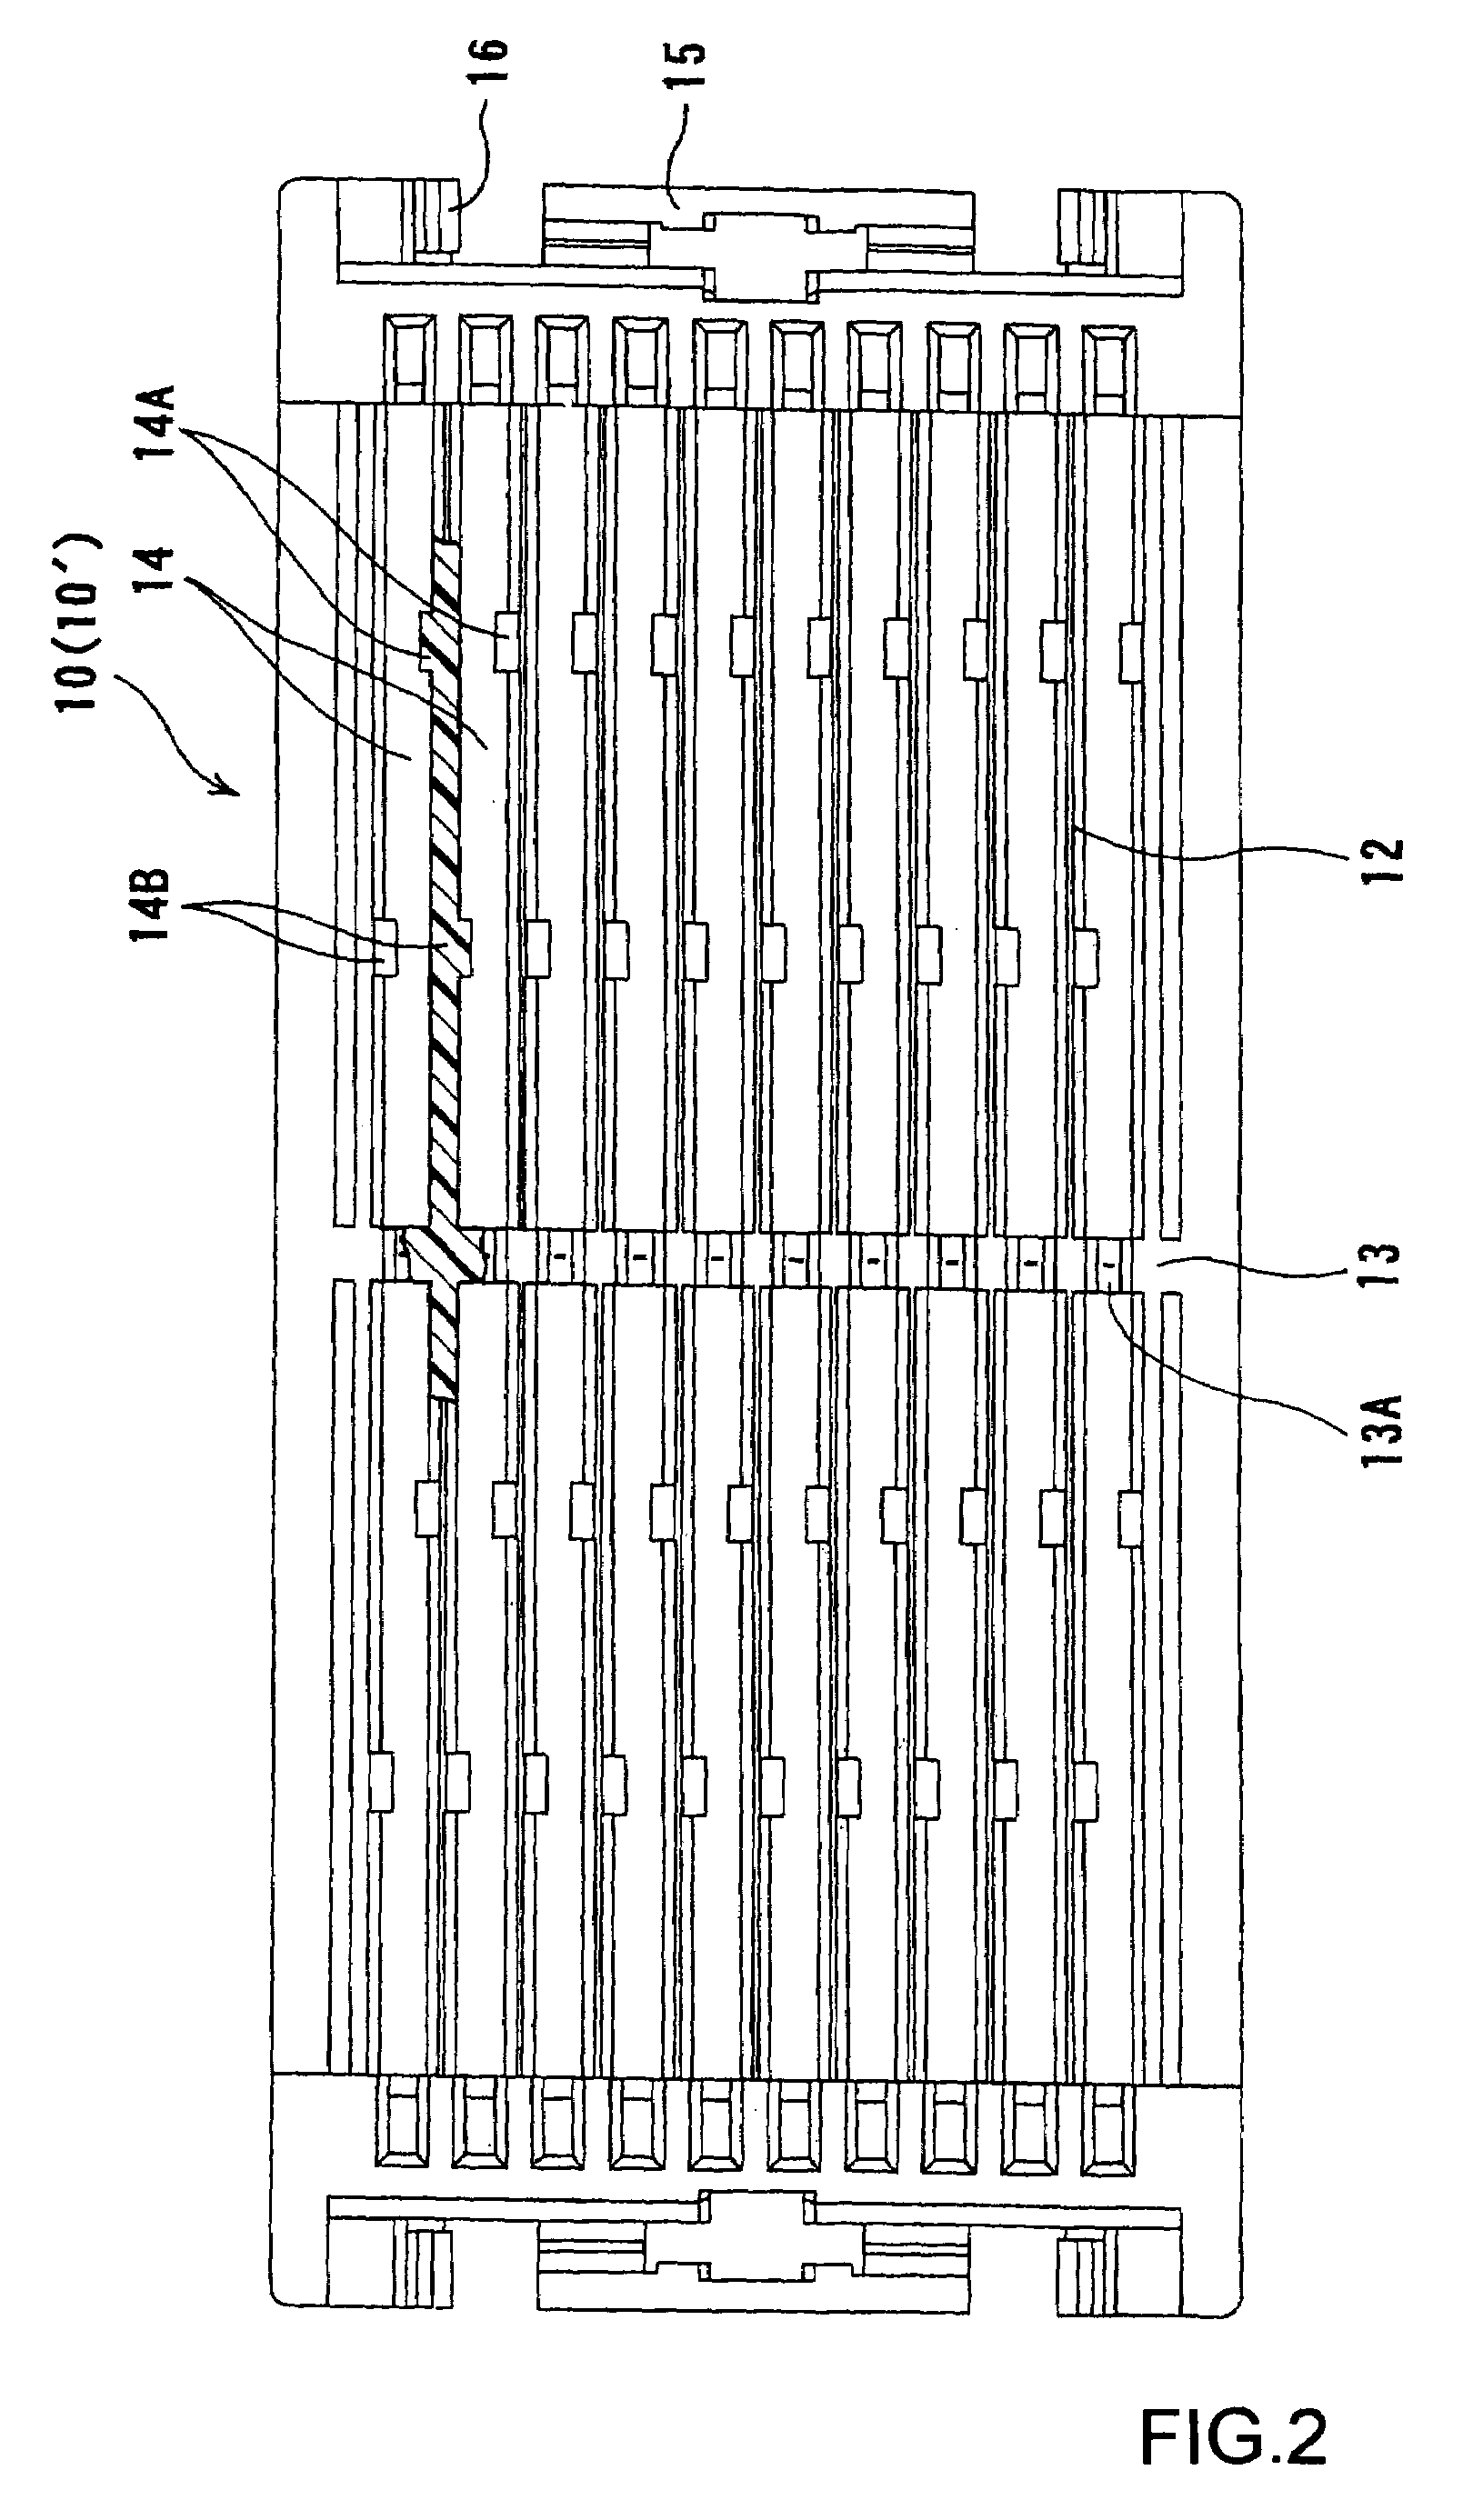 Intermediate electrical connector device and its connecting structure